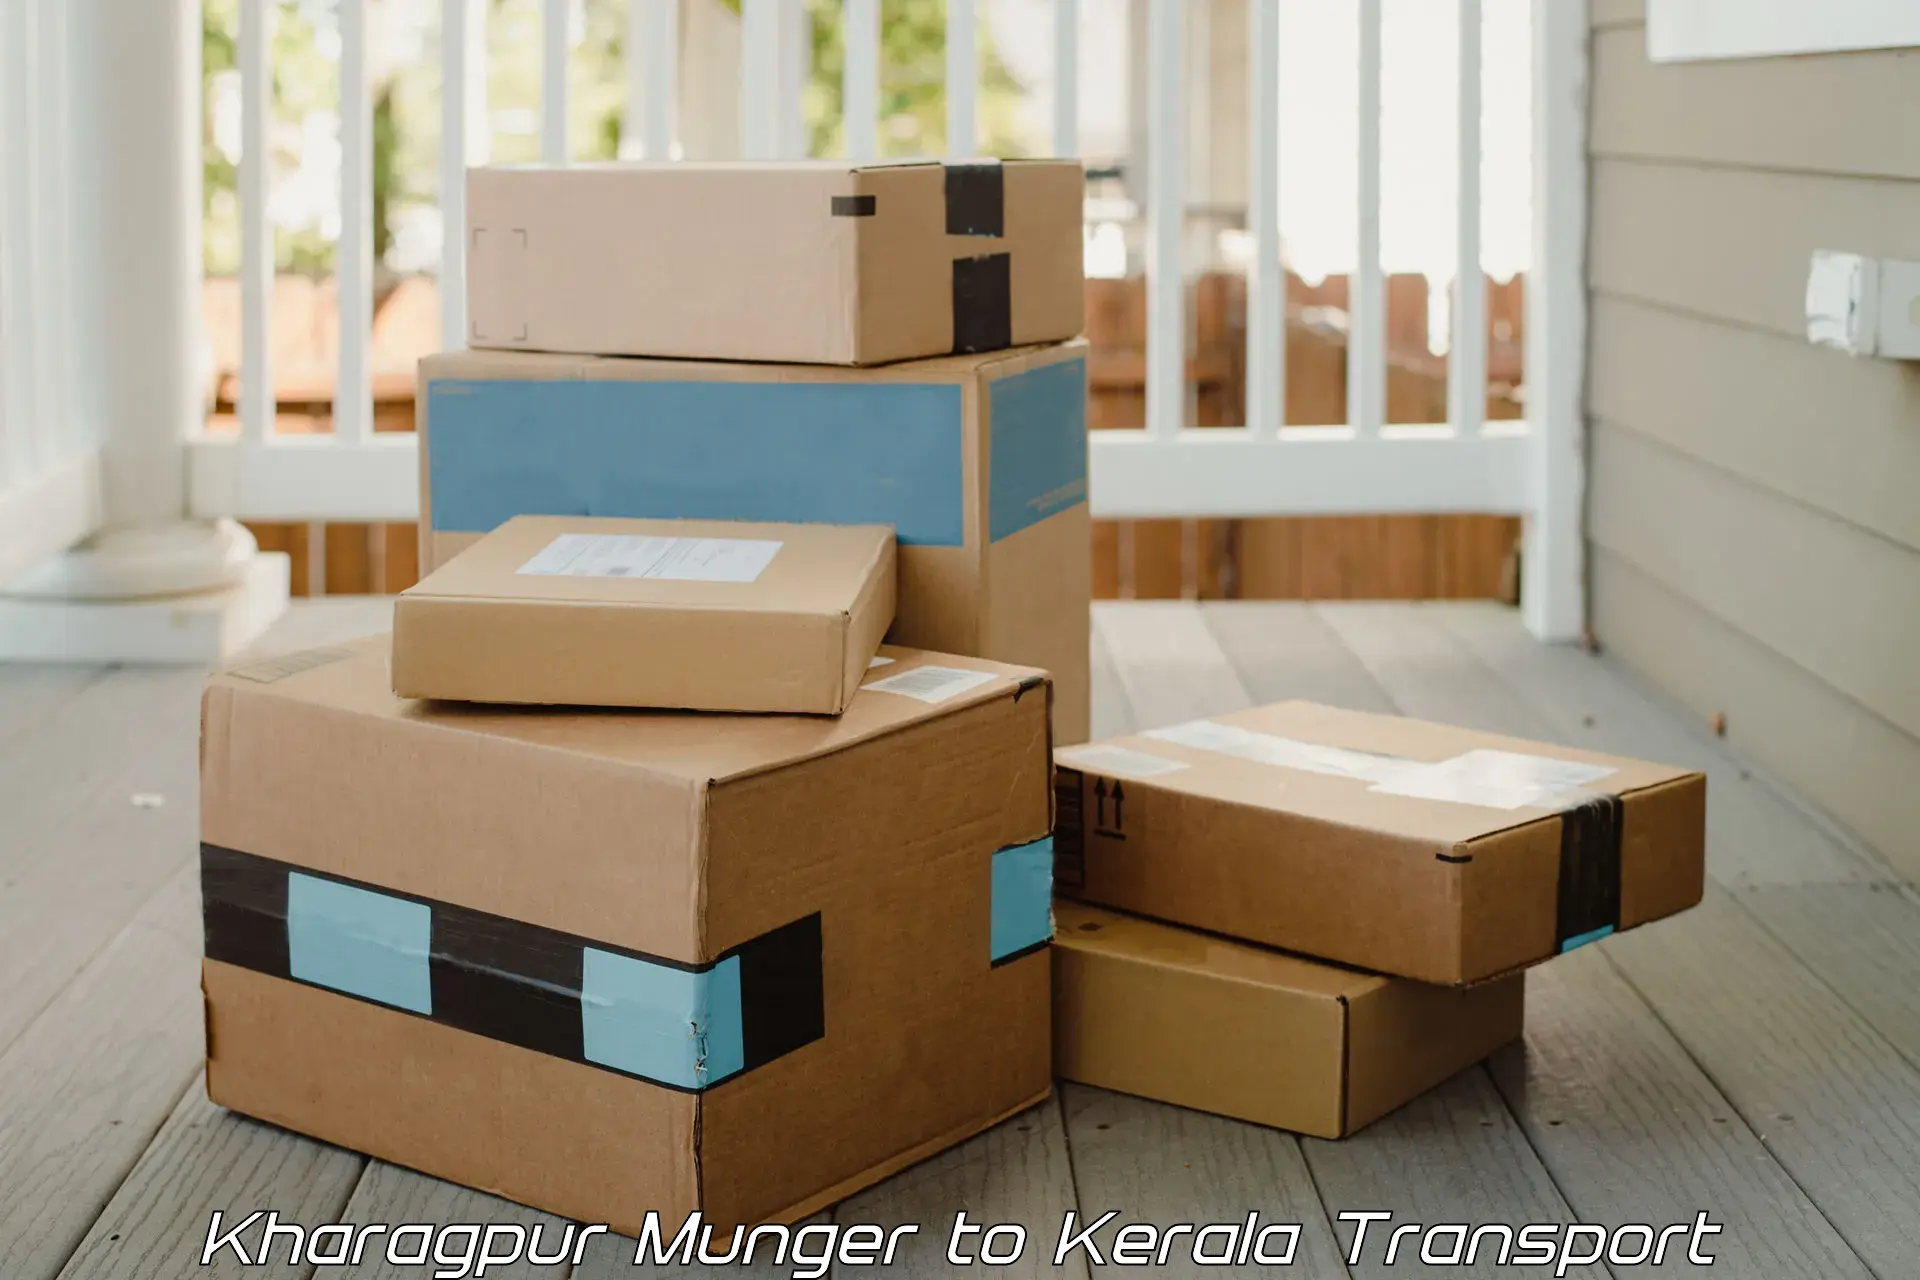 Container transportation services Kharagpur Munger to Kerala